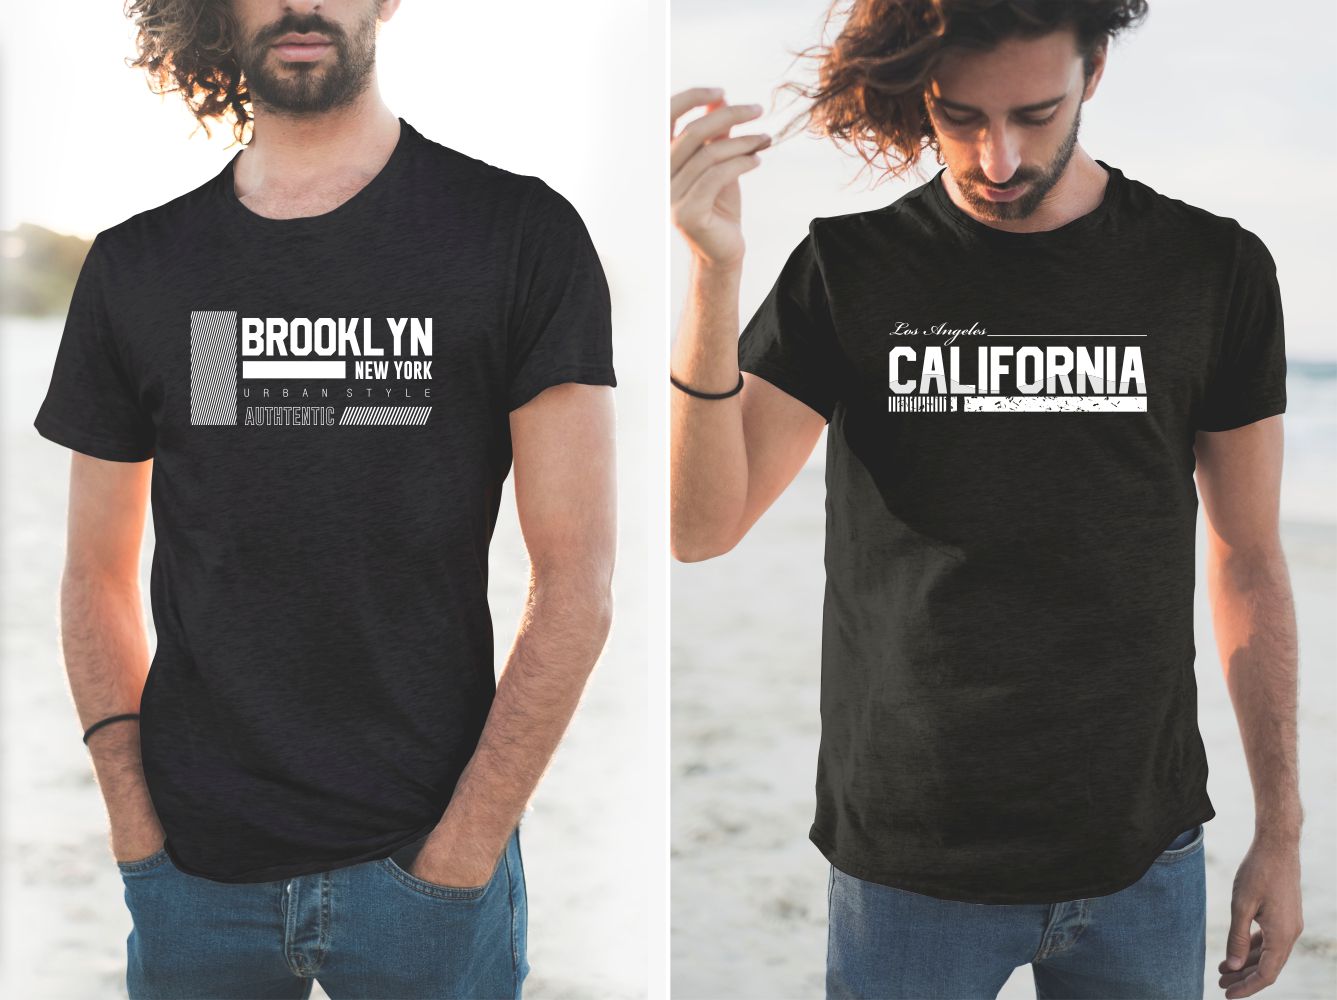 The black T-shirts are embossed with white California and Brooklyn.